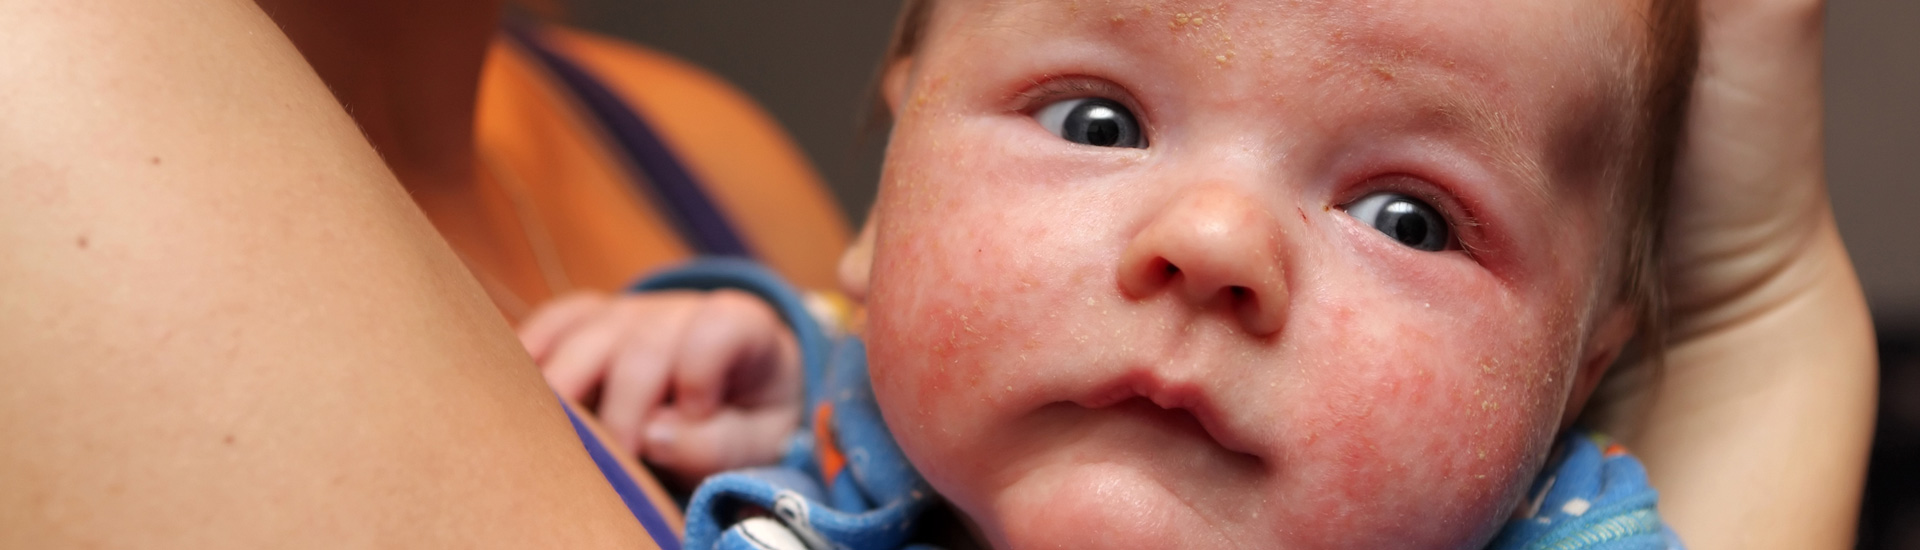 The baby has eczema on his face